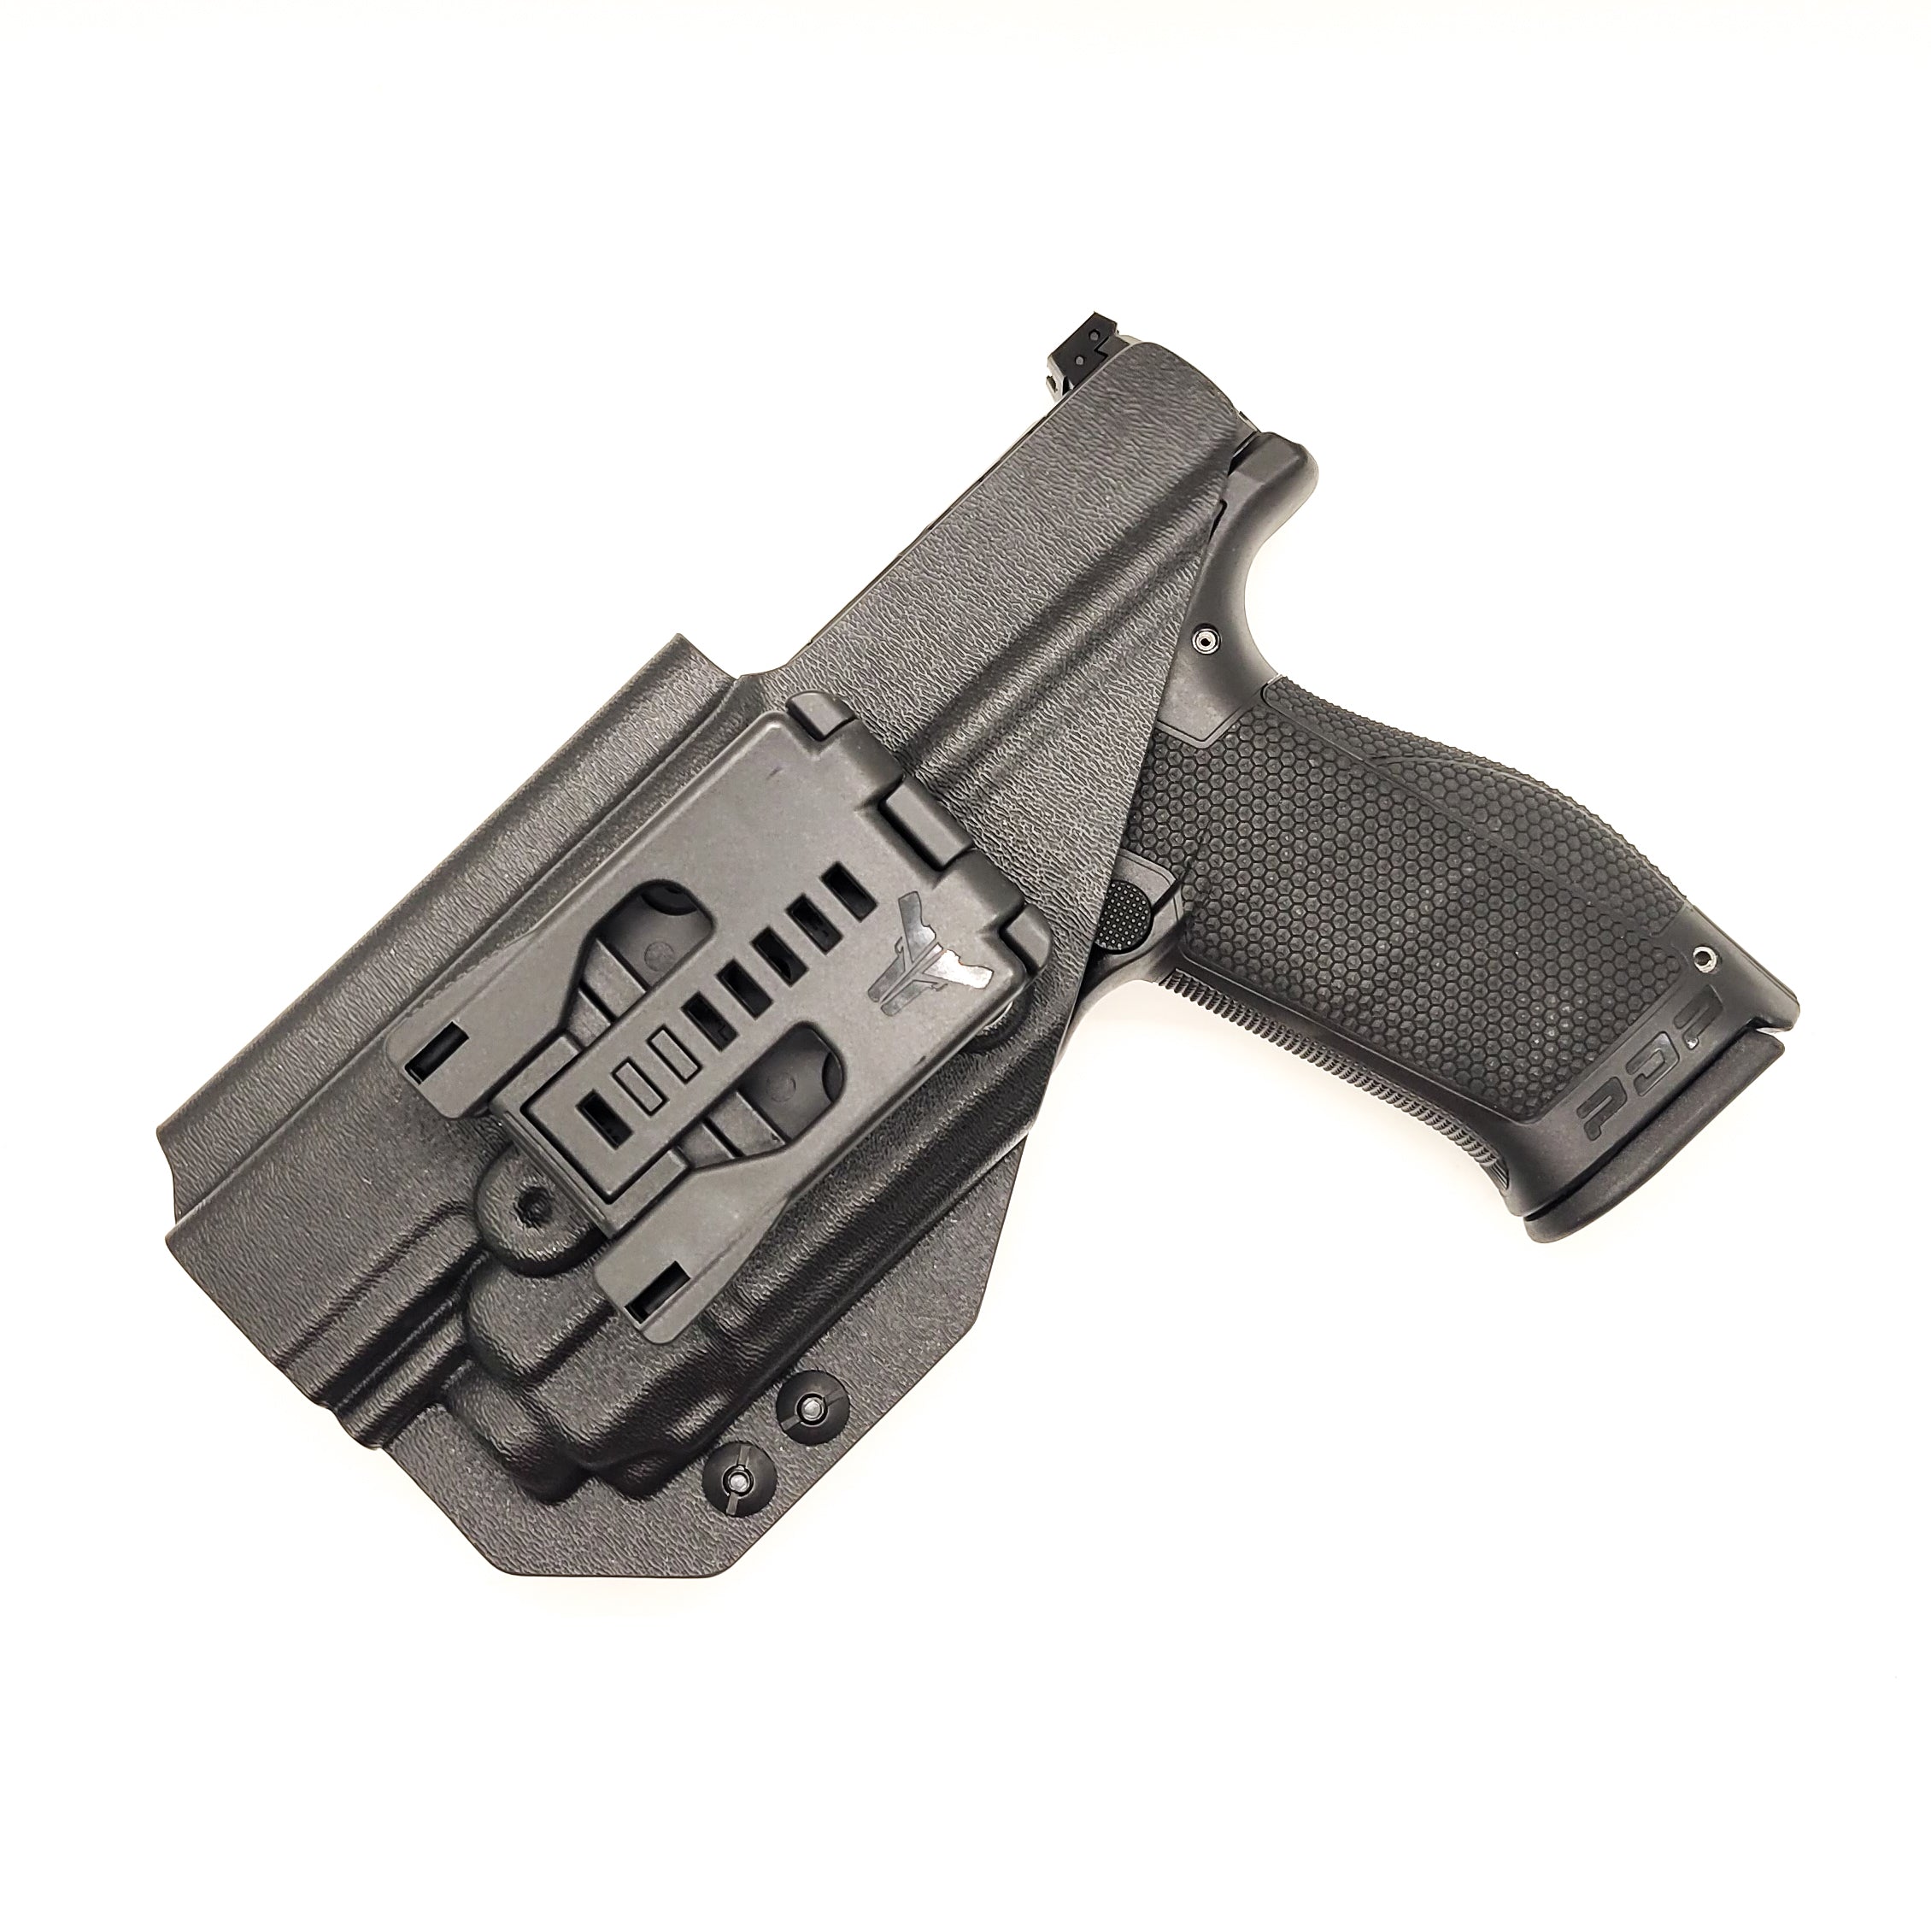 For the best Outside Waistband Taco Style Holster designed to fit the Walther PDP 4.5" Full-Size pistol with the Streamlight TLR-8 mounted on the firearm, shop Four Brothers Holsters. Cut for red dot sight, full sweat guard, adjustable retention & open muzzle for threaded barrels & compensators.